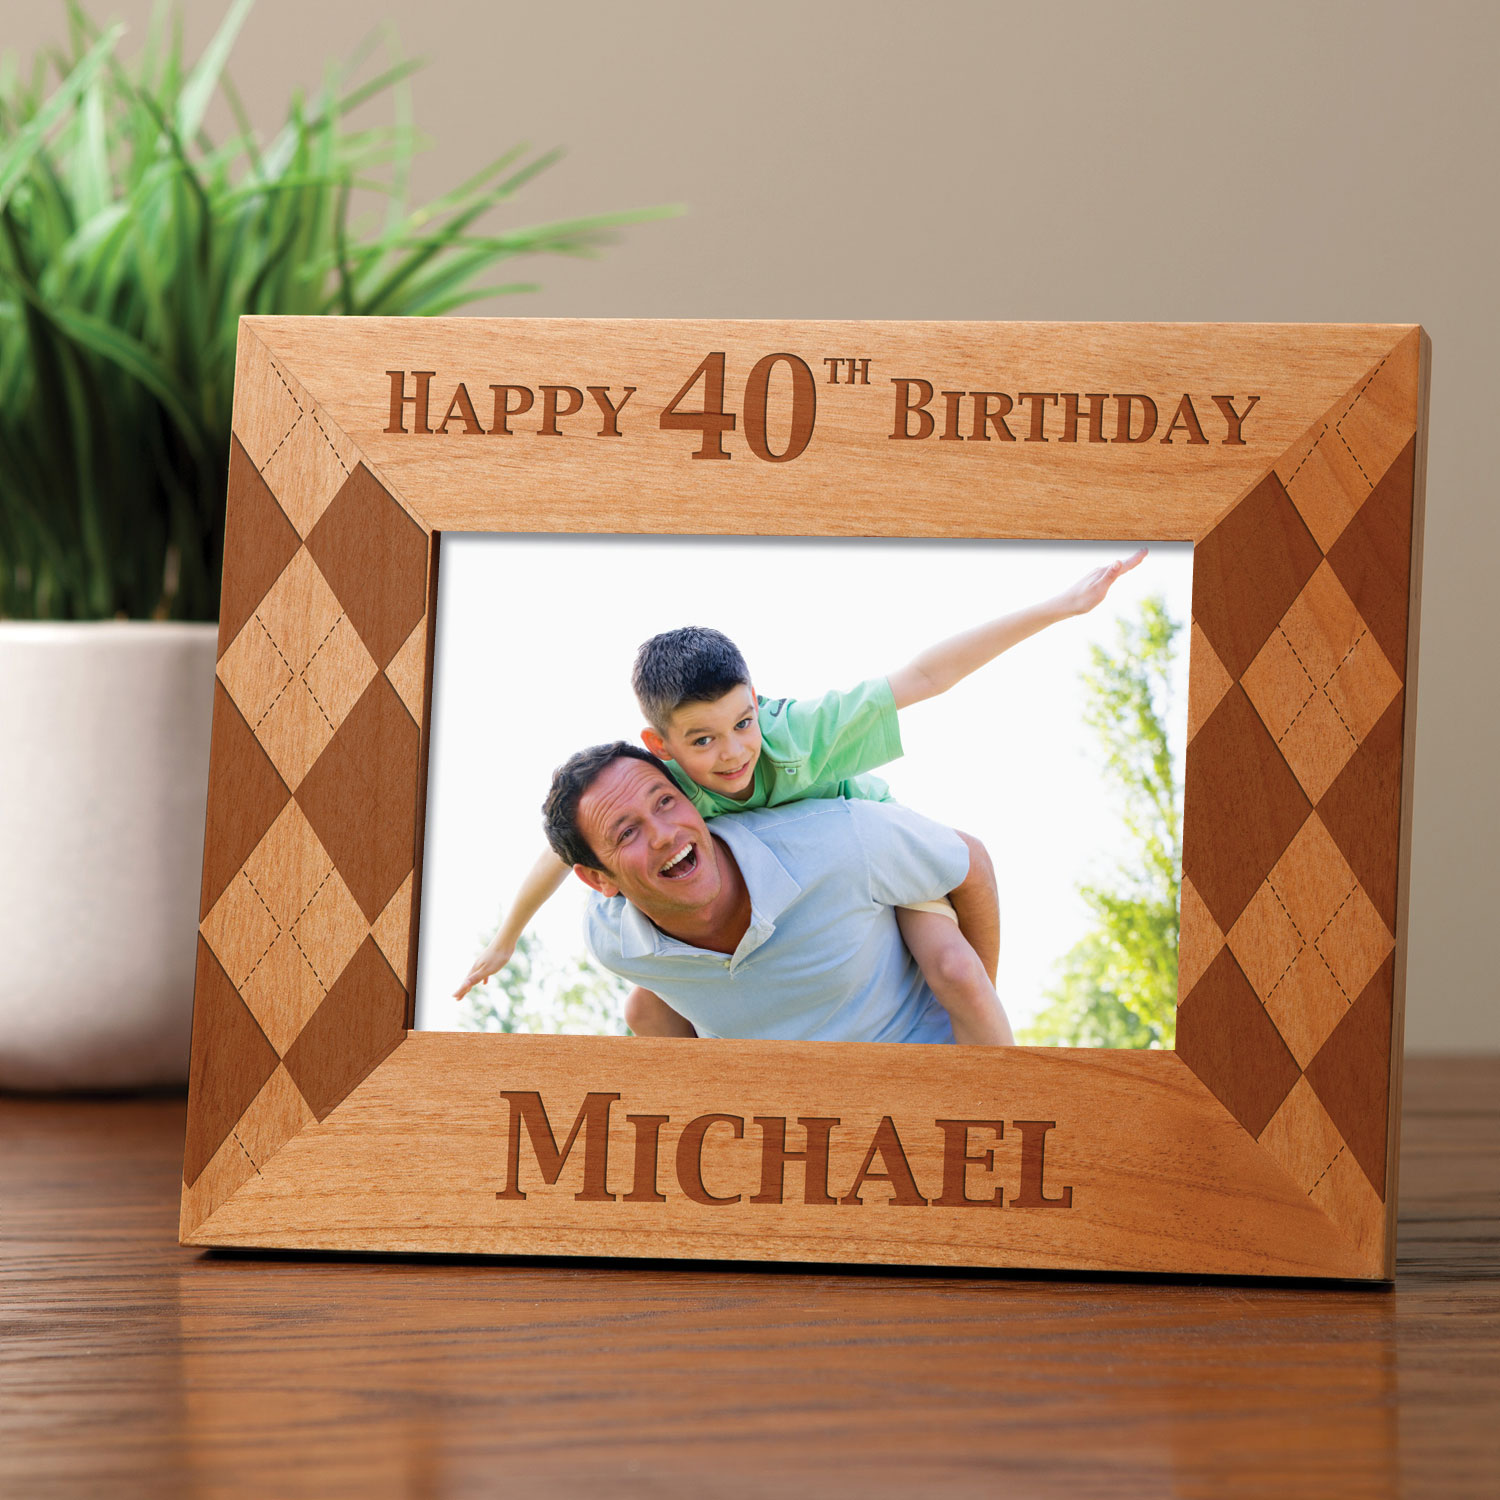 His Birthday Personalized Frame